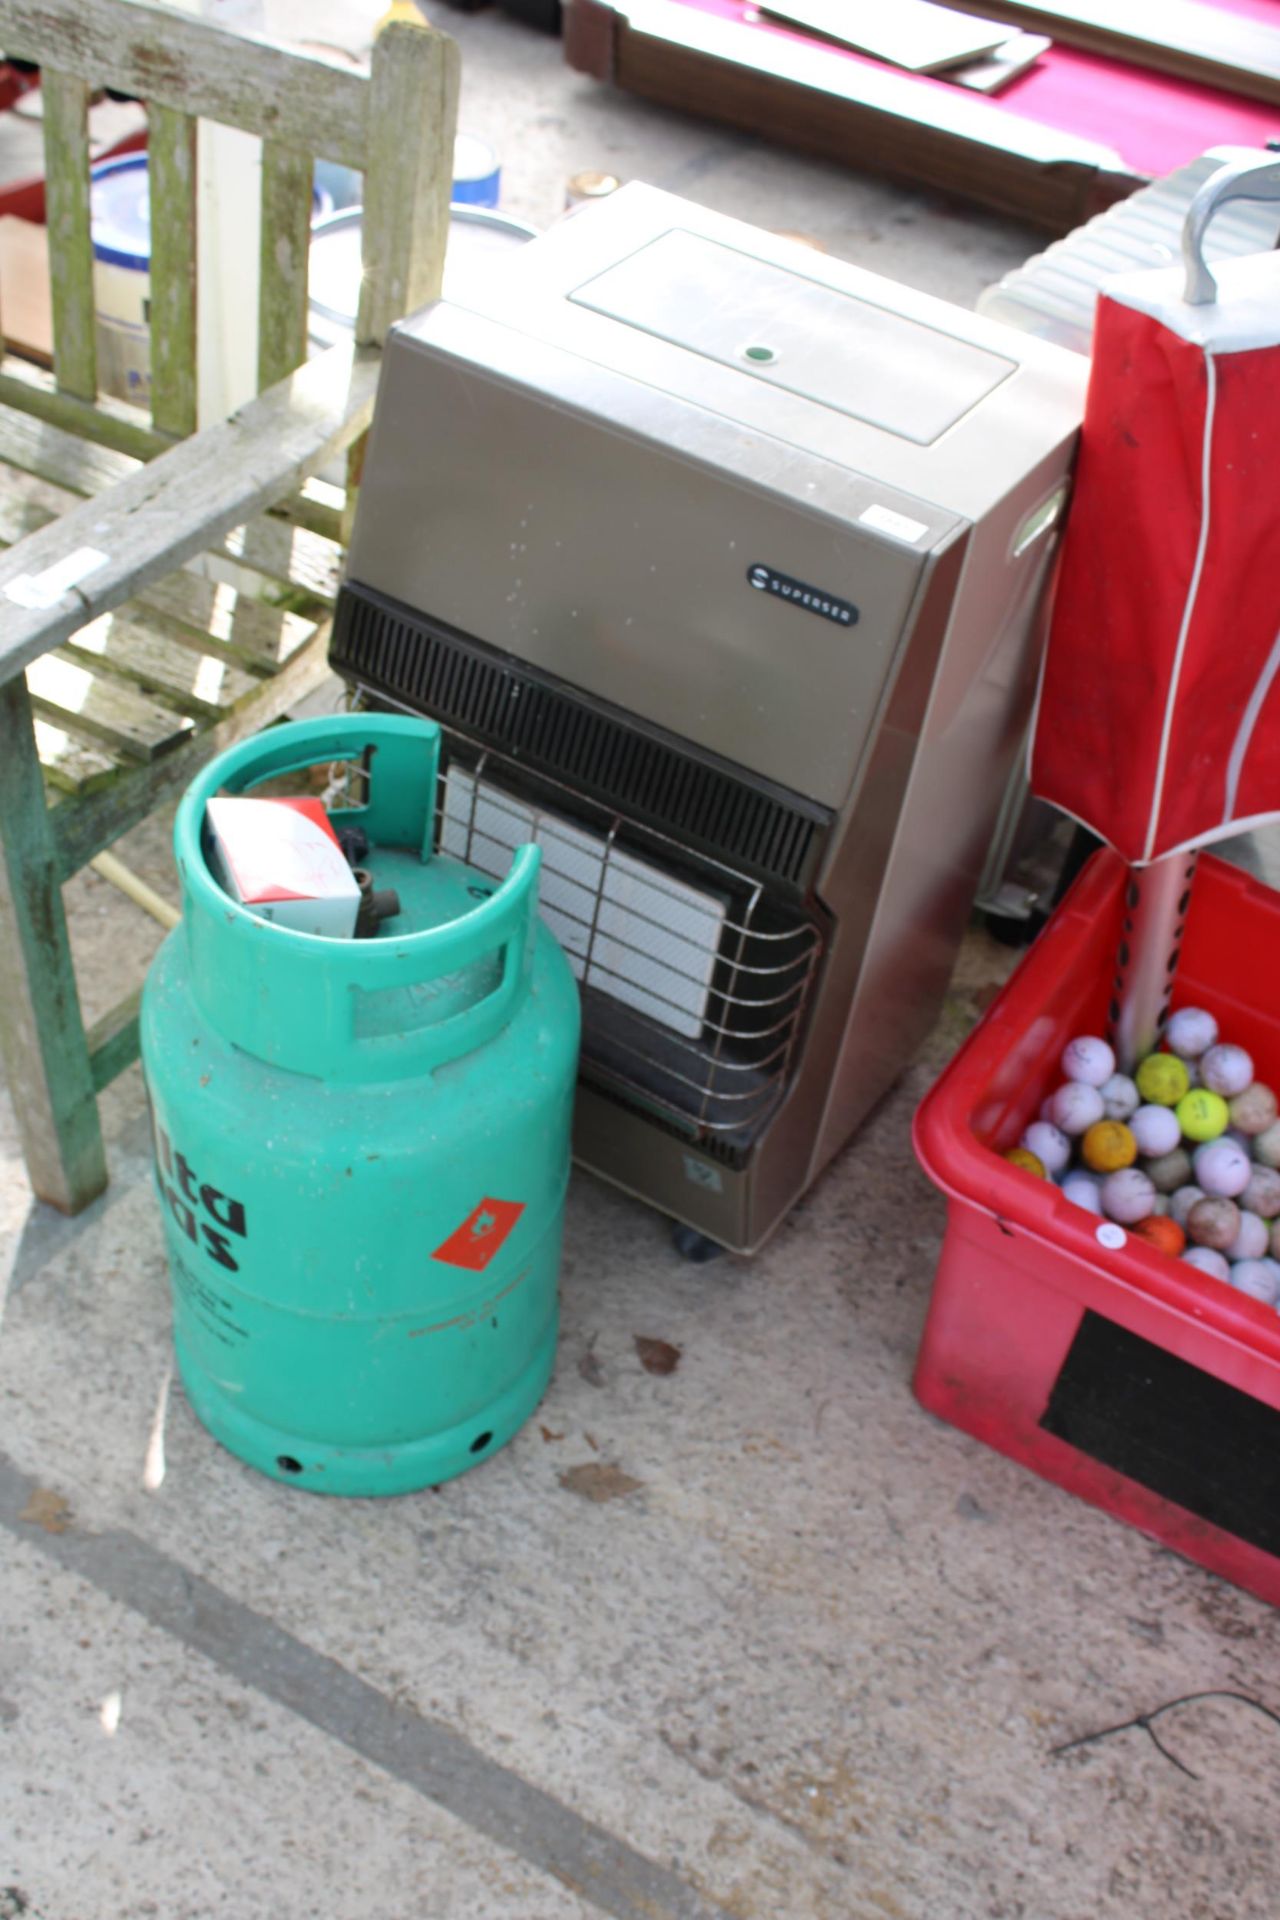 A SUPERSER GAS HEATER AND TWO GAS BOTTLES